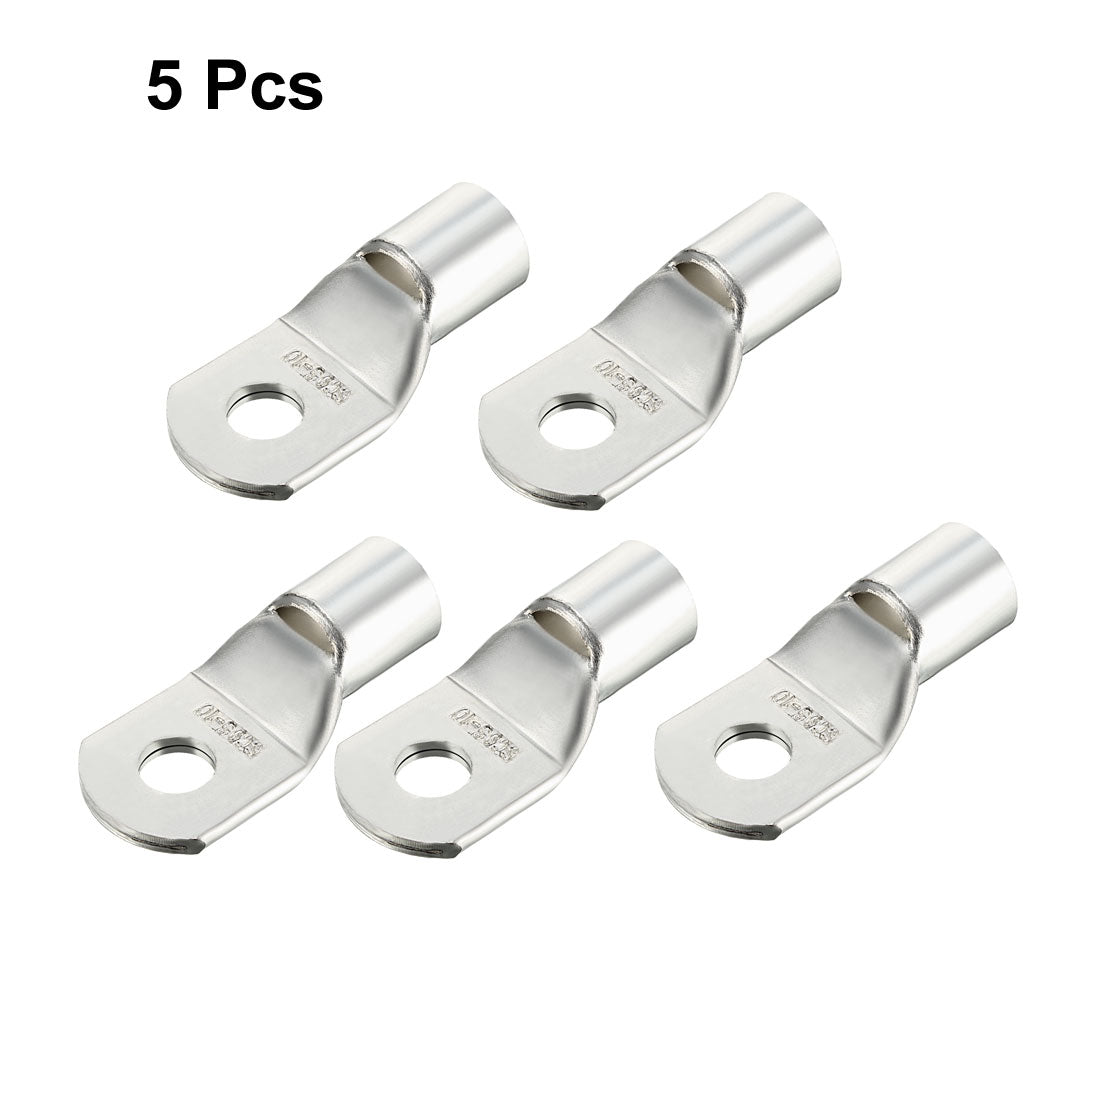 uxcell Uxcell 5Pcs SC95-10 Non-Insulated U-Type Copper Crimp Terminals 95mm2 Wire Connector Silver Tone